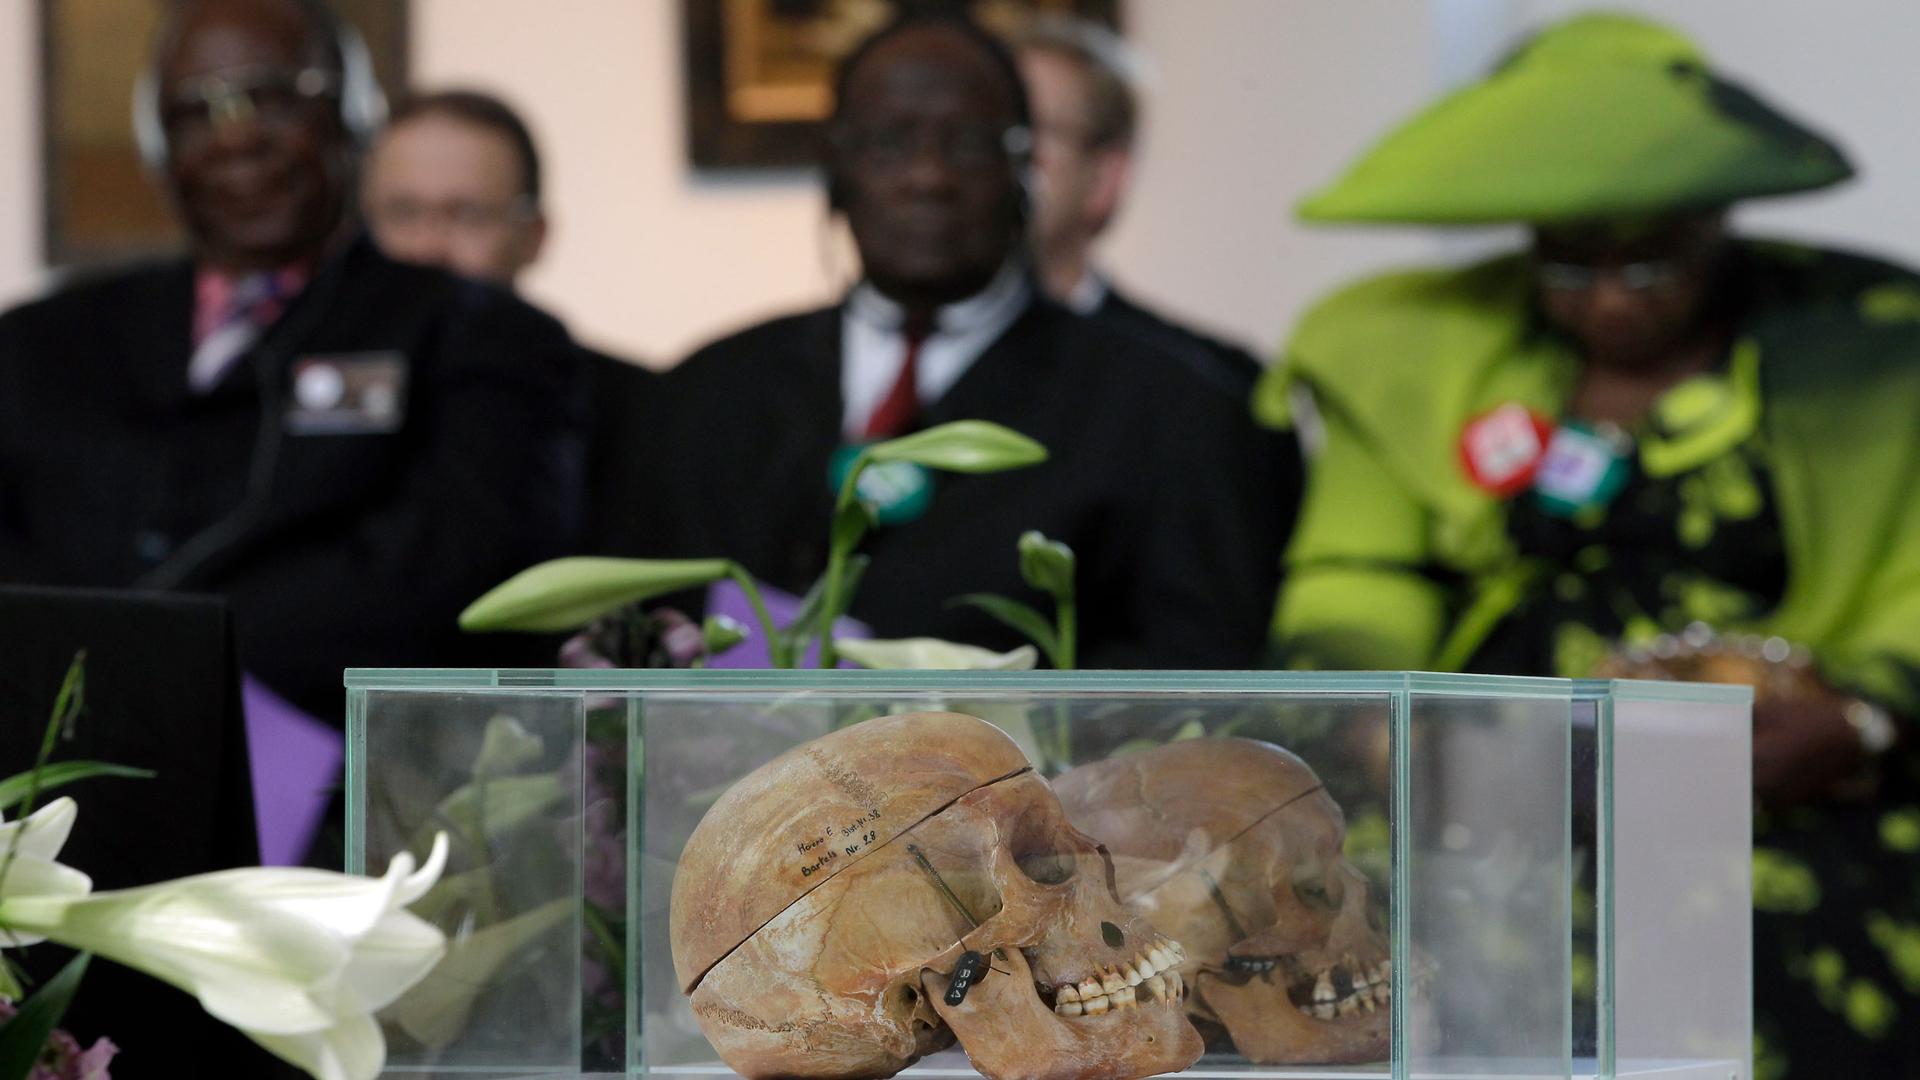 Two human skulls are shown in a glass case with several people wearing dark suits in the background.